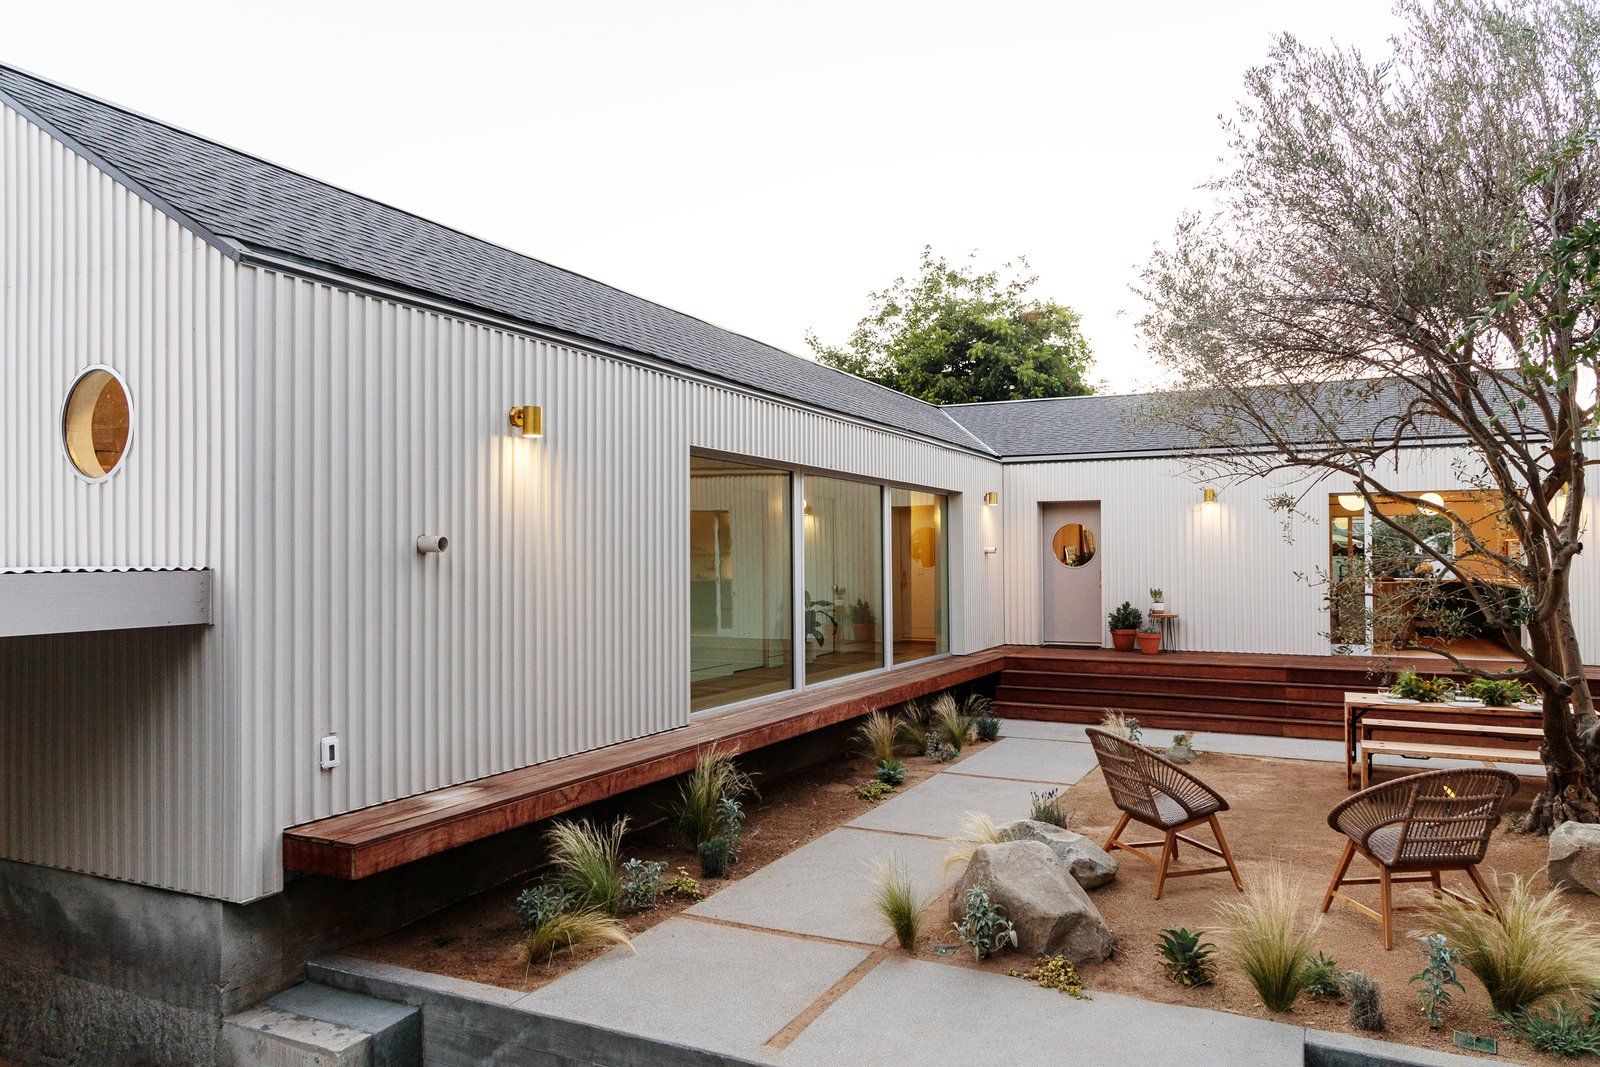 the-original-1000-square-foot-house-where-the-open-living-dining-and-kitchen-area-is-mostly-located-abuts-the-new-1000-square-foot-addition-in-an-t-configuration-to-make-the-best-use-of-the-site.jpg